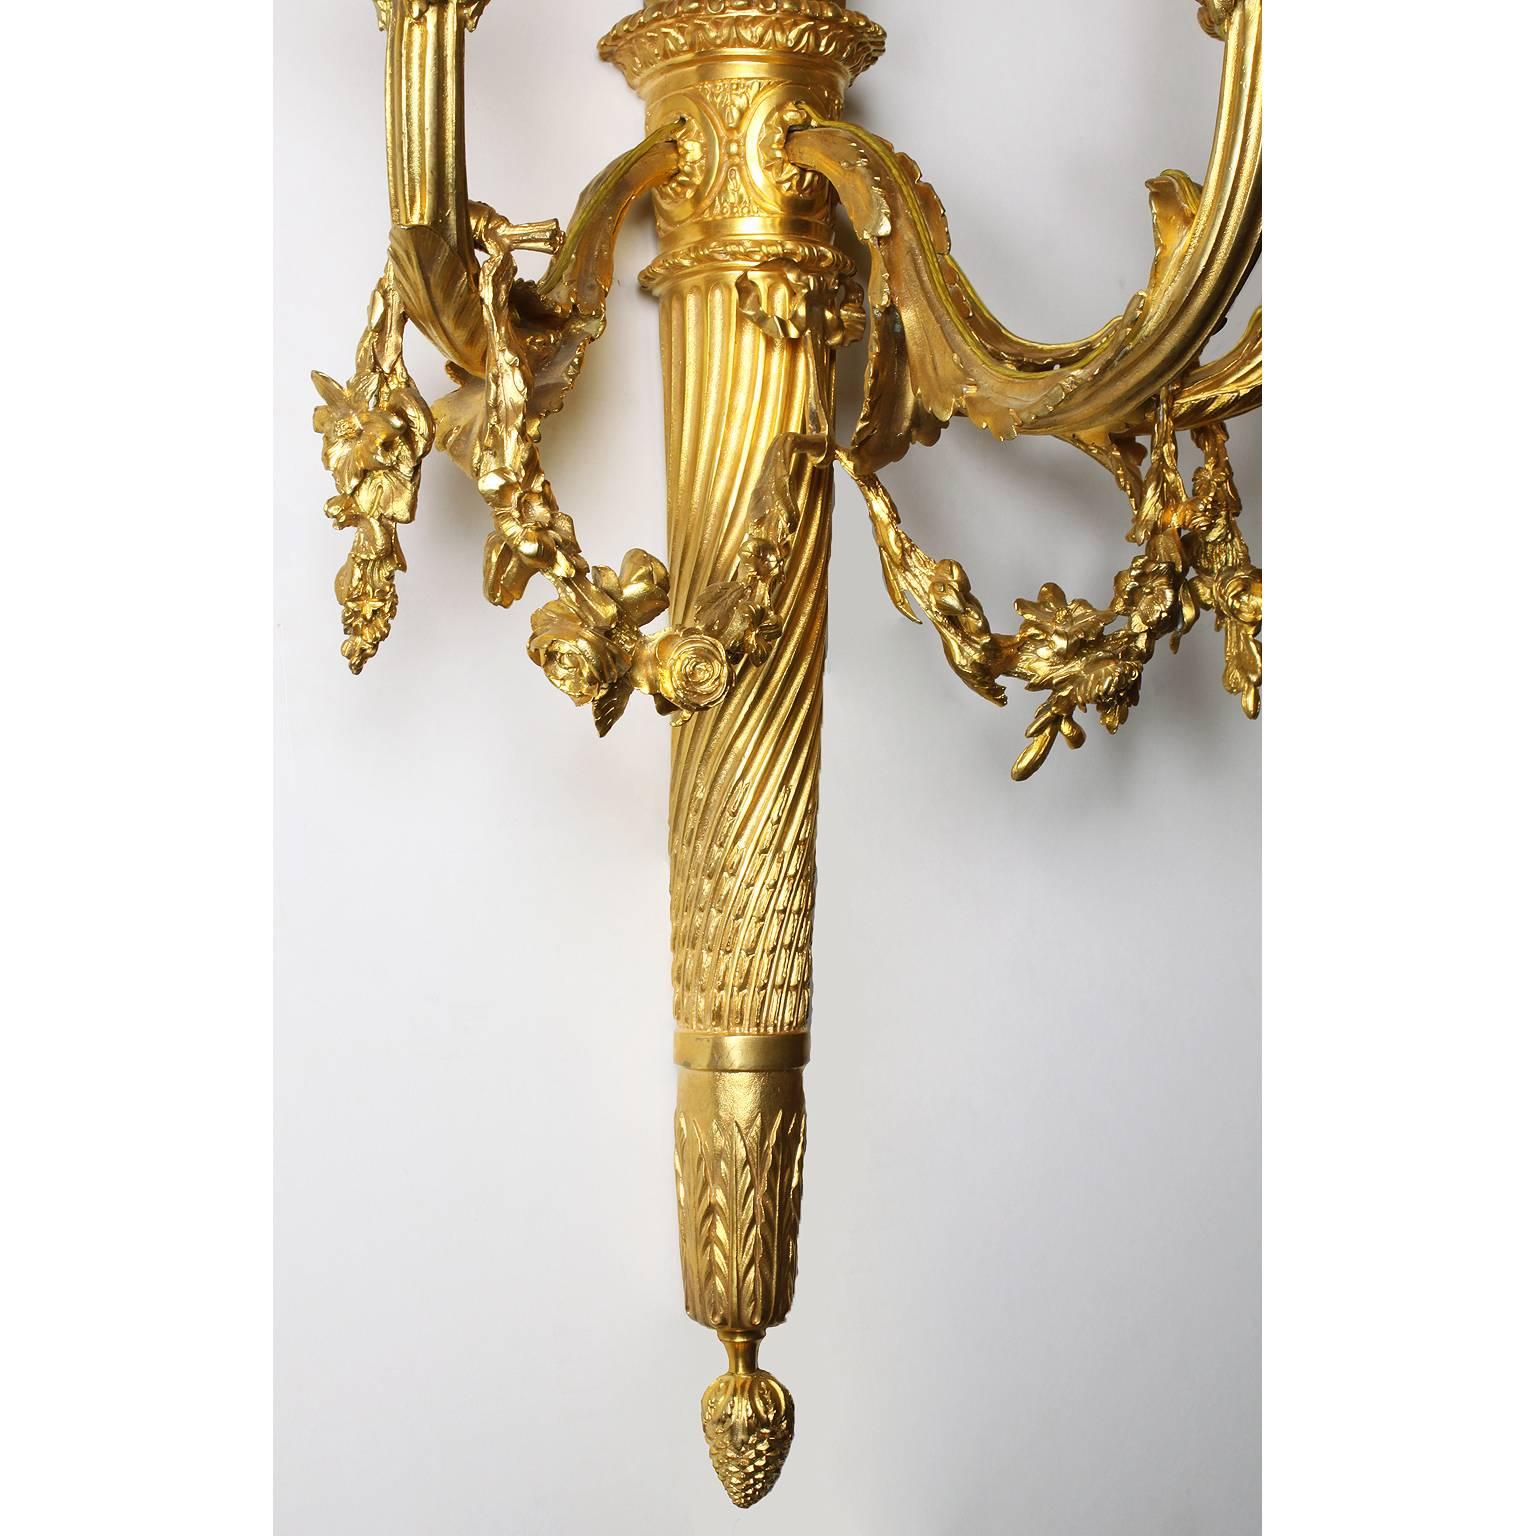 Early 20th Century Pair of French 19th-20th Century Louis XVI Style Gilt-Bronze Torch Wall Sconces For Sale